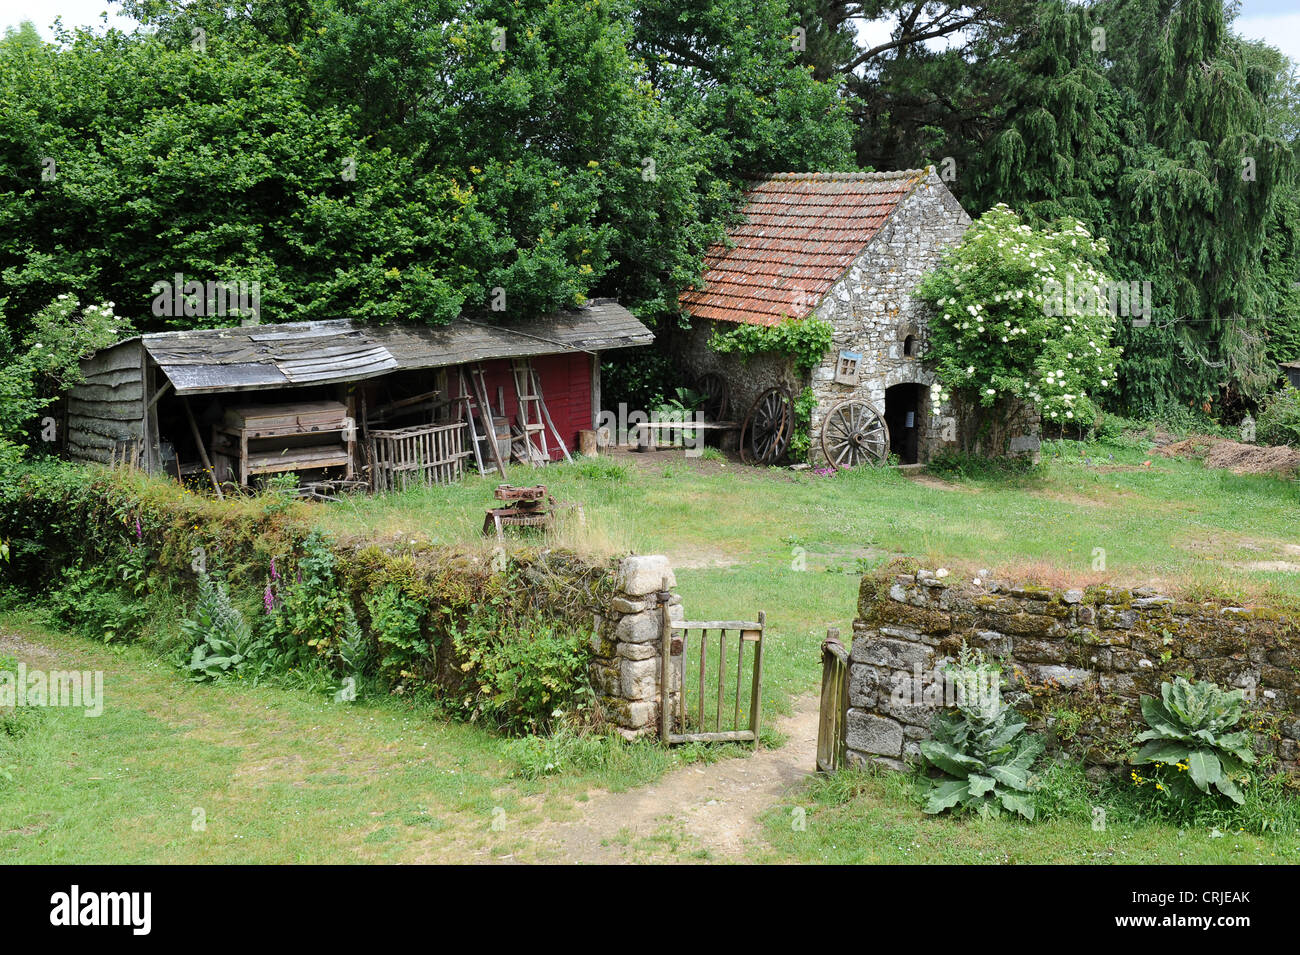 Rustic French farm scene at the Ecomusee de Saint-Degan in Brittany France Stock Photo